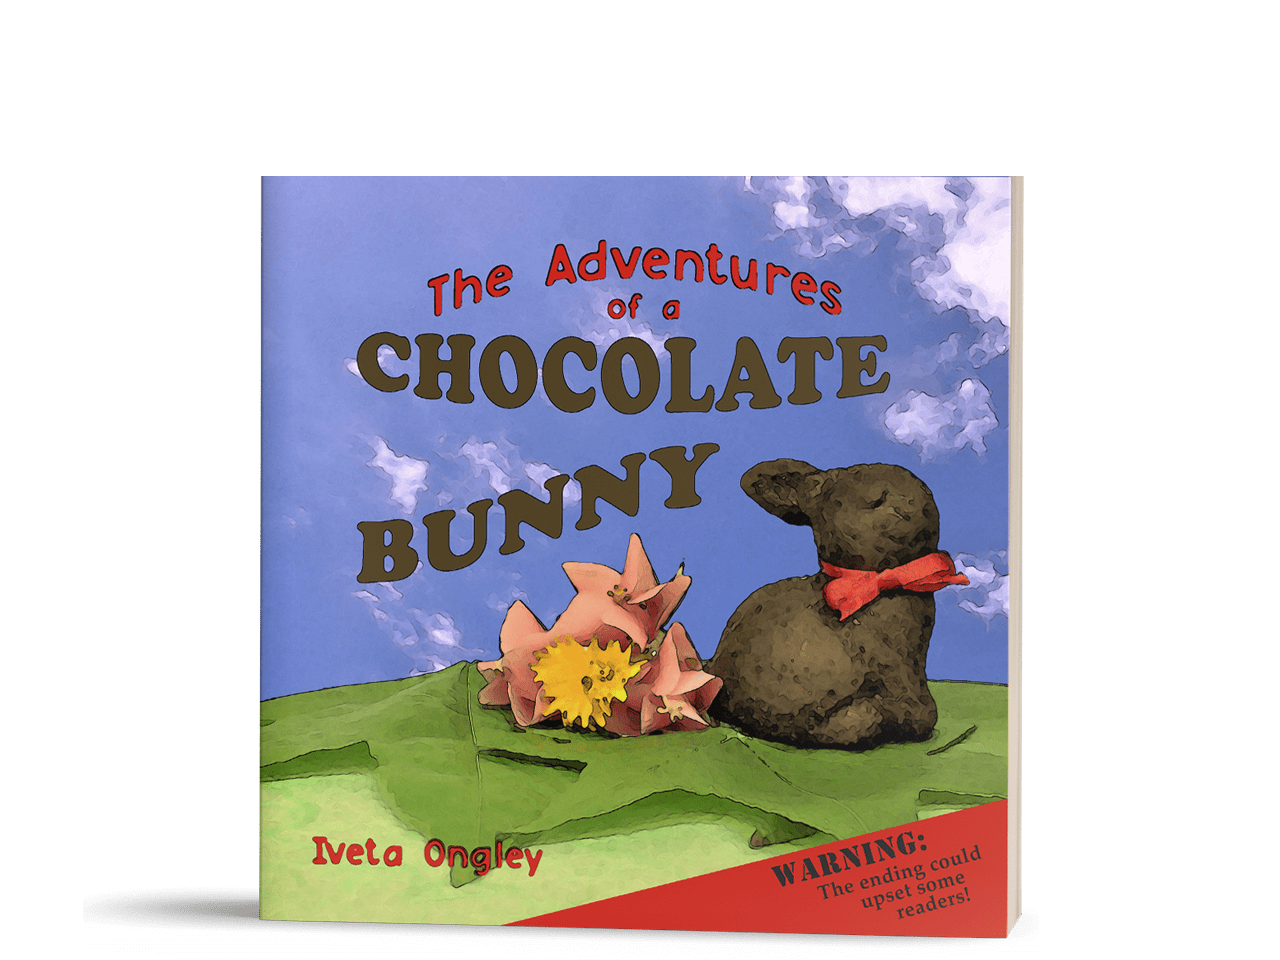 The adventures of a chocolate bunny